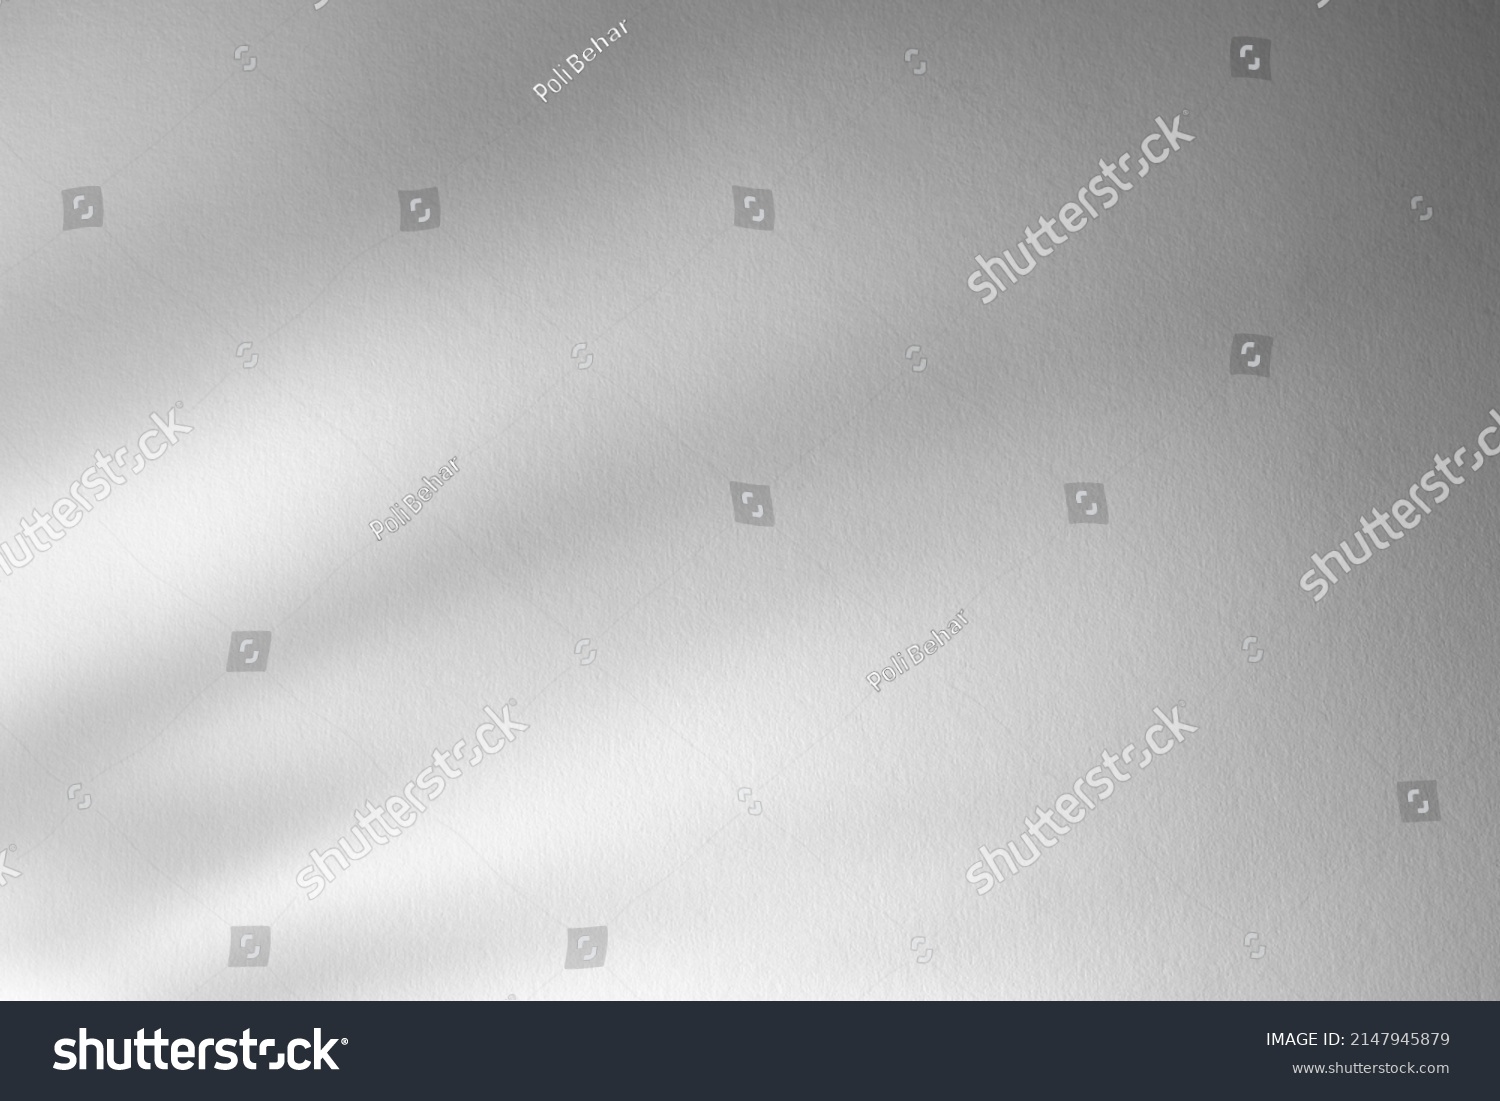 Light grayscale background, abstract shadow, paper texture, basis for poster, presentation #2147945879